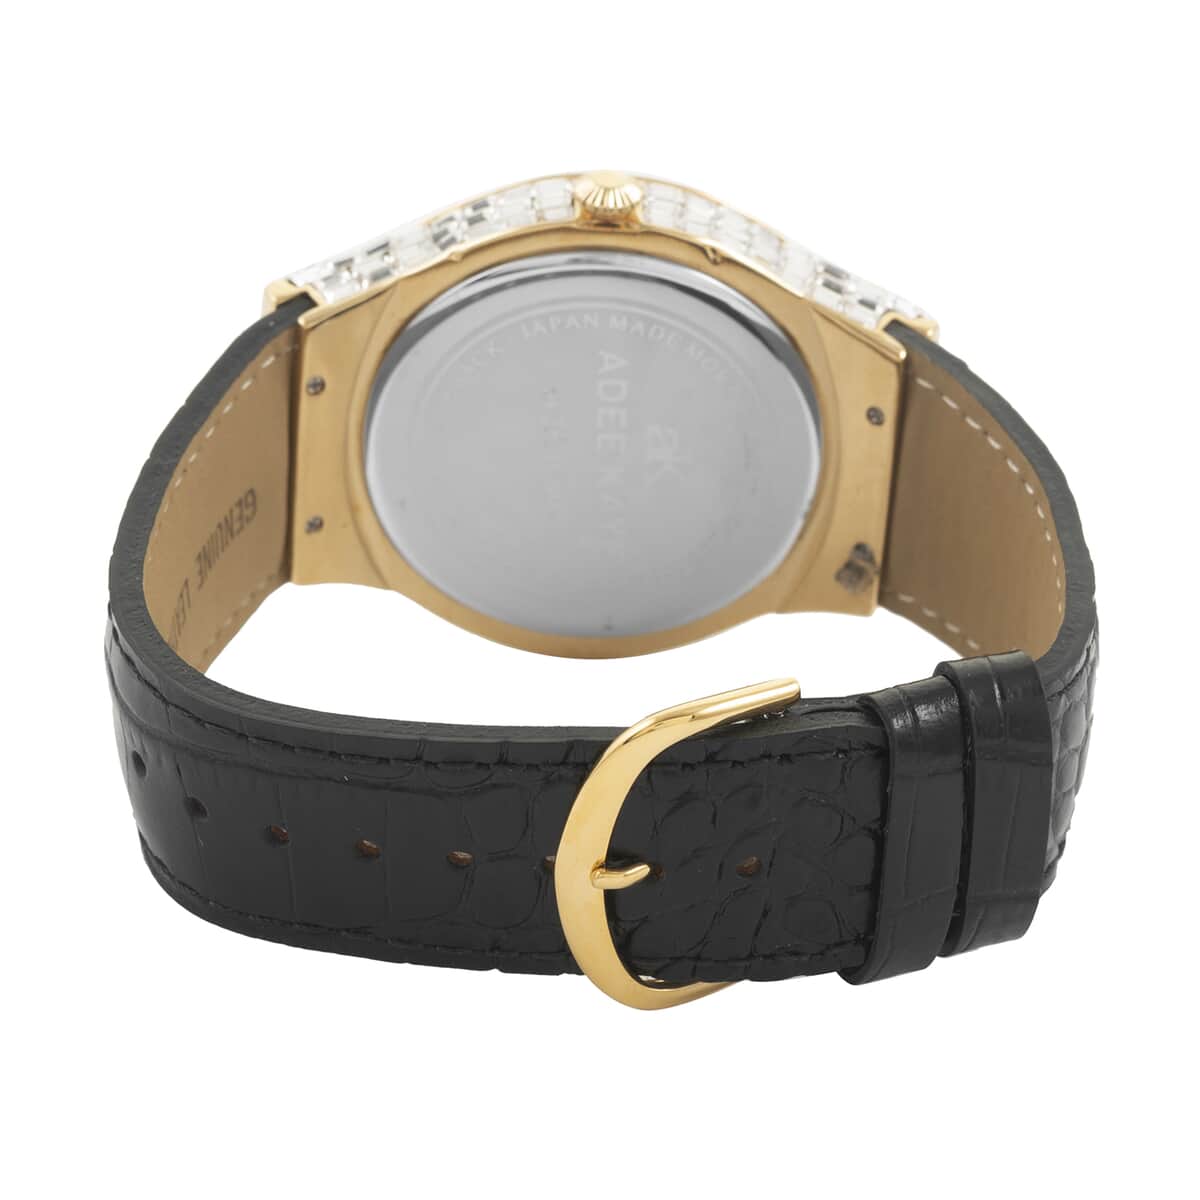 ADEE KAYE Austrian Crystal Japan Quartz Movement Goldtone Dial Watch in Black Leather Band (26 mm) image number 3